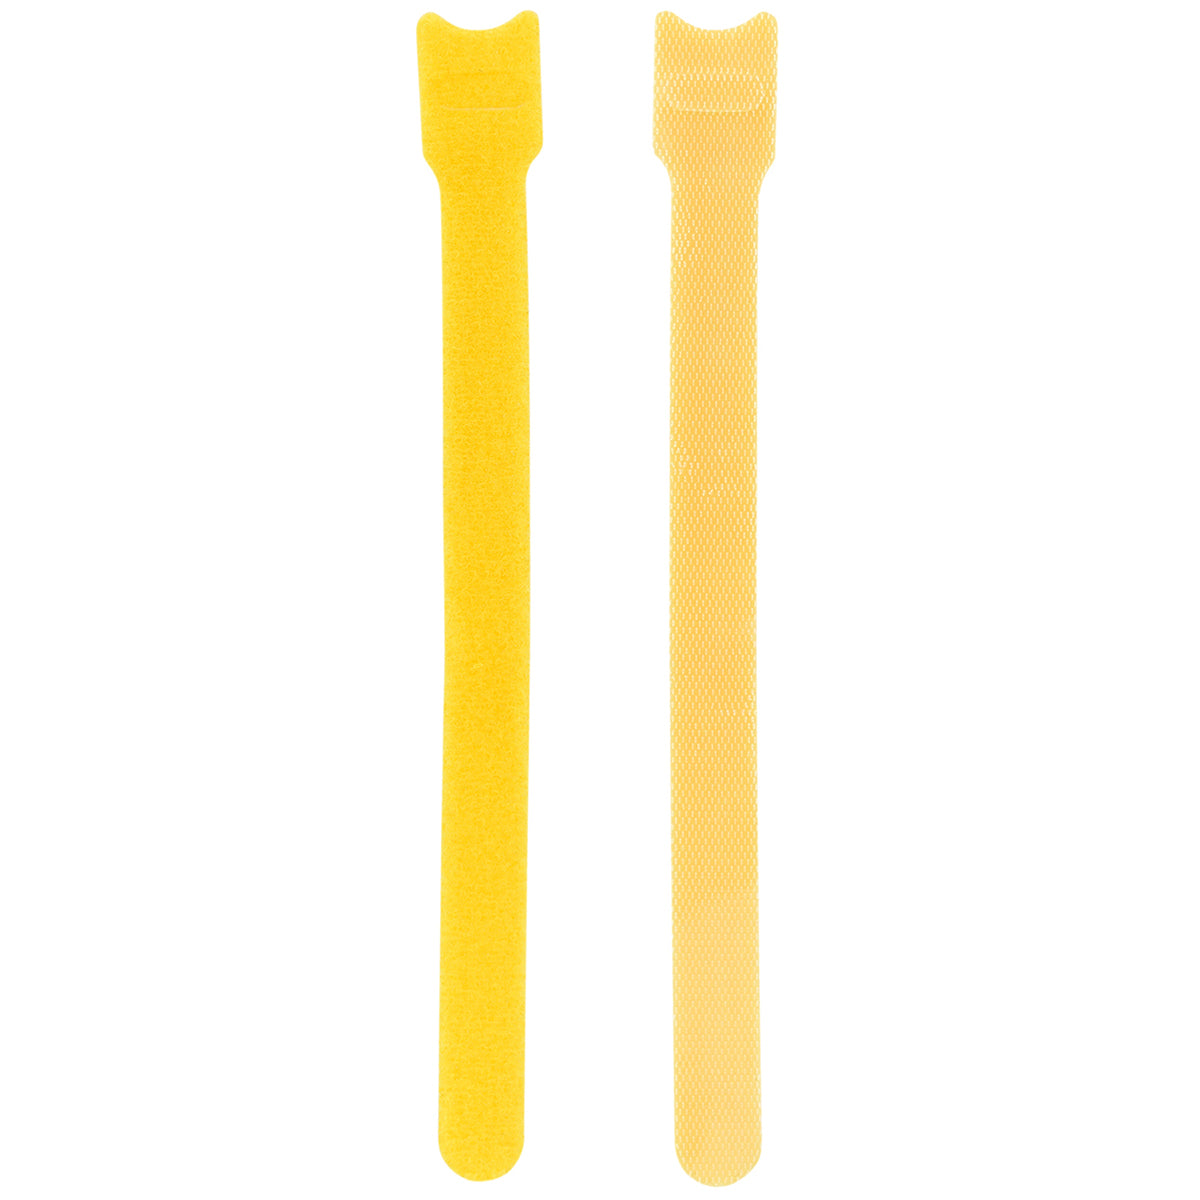 Displaying of two upright yellow nylon cable ties  